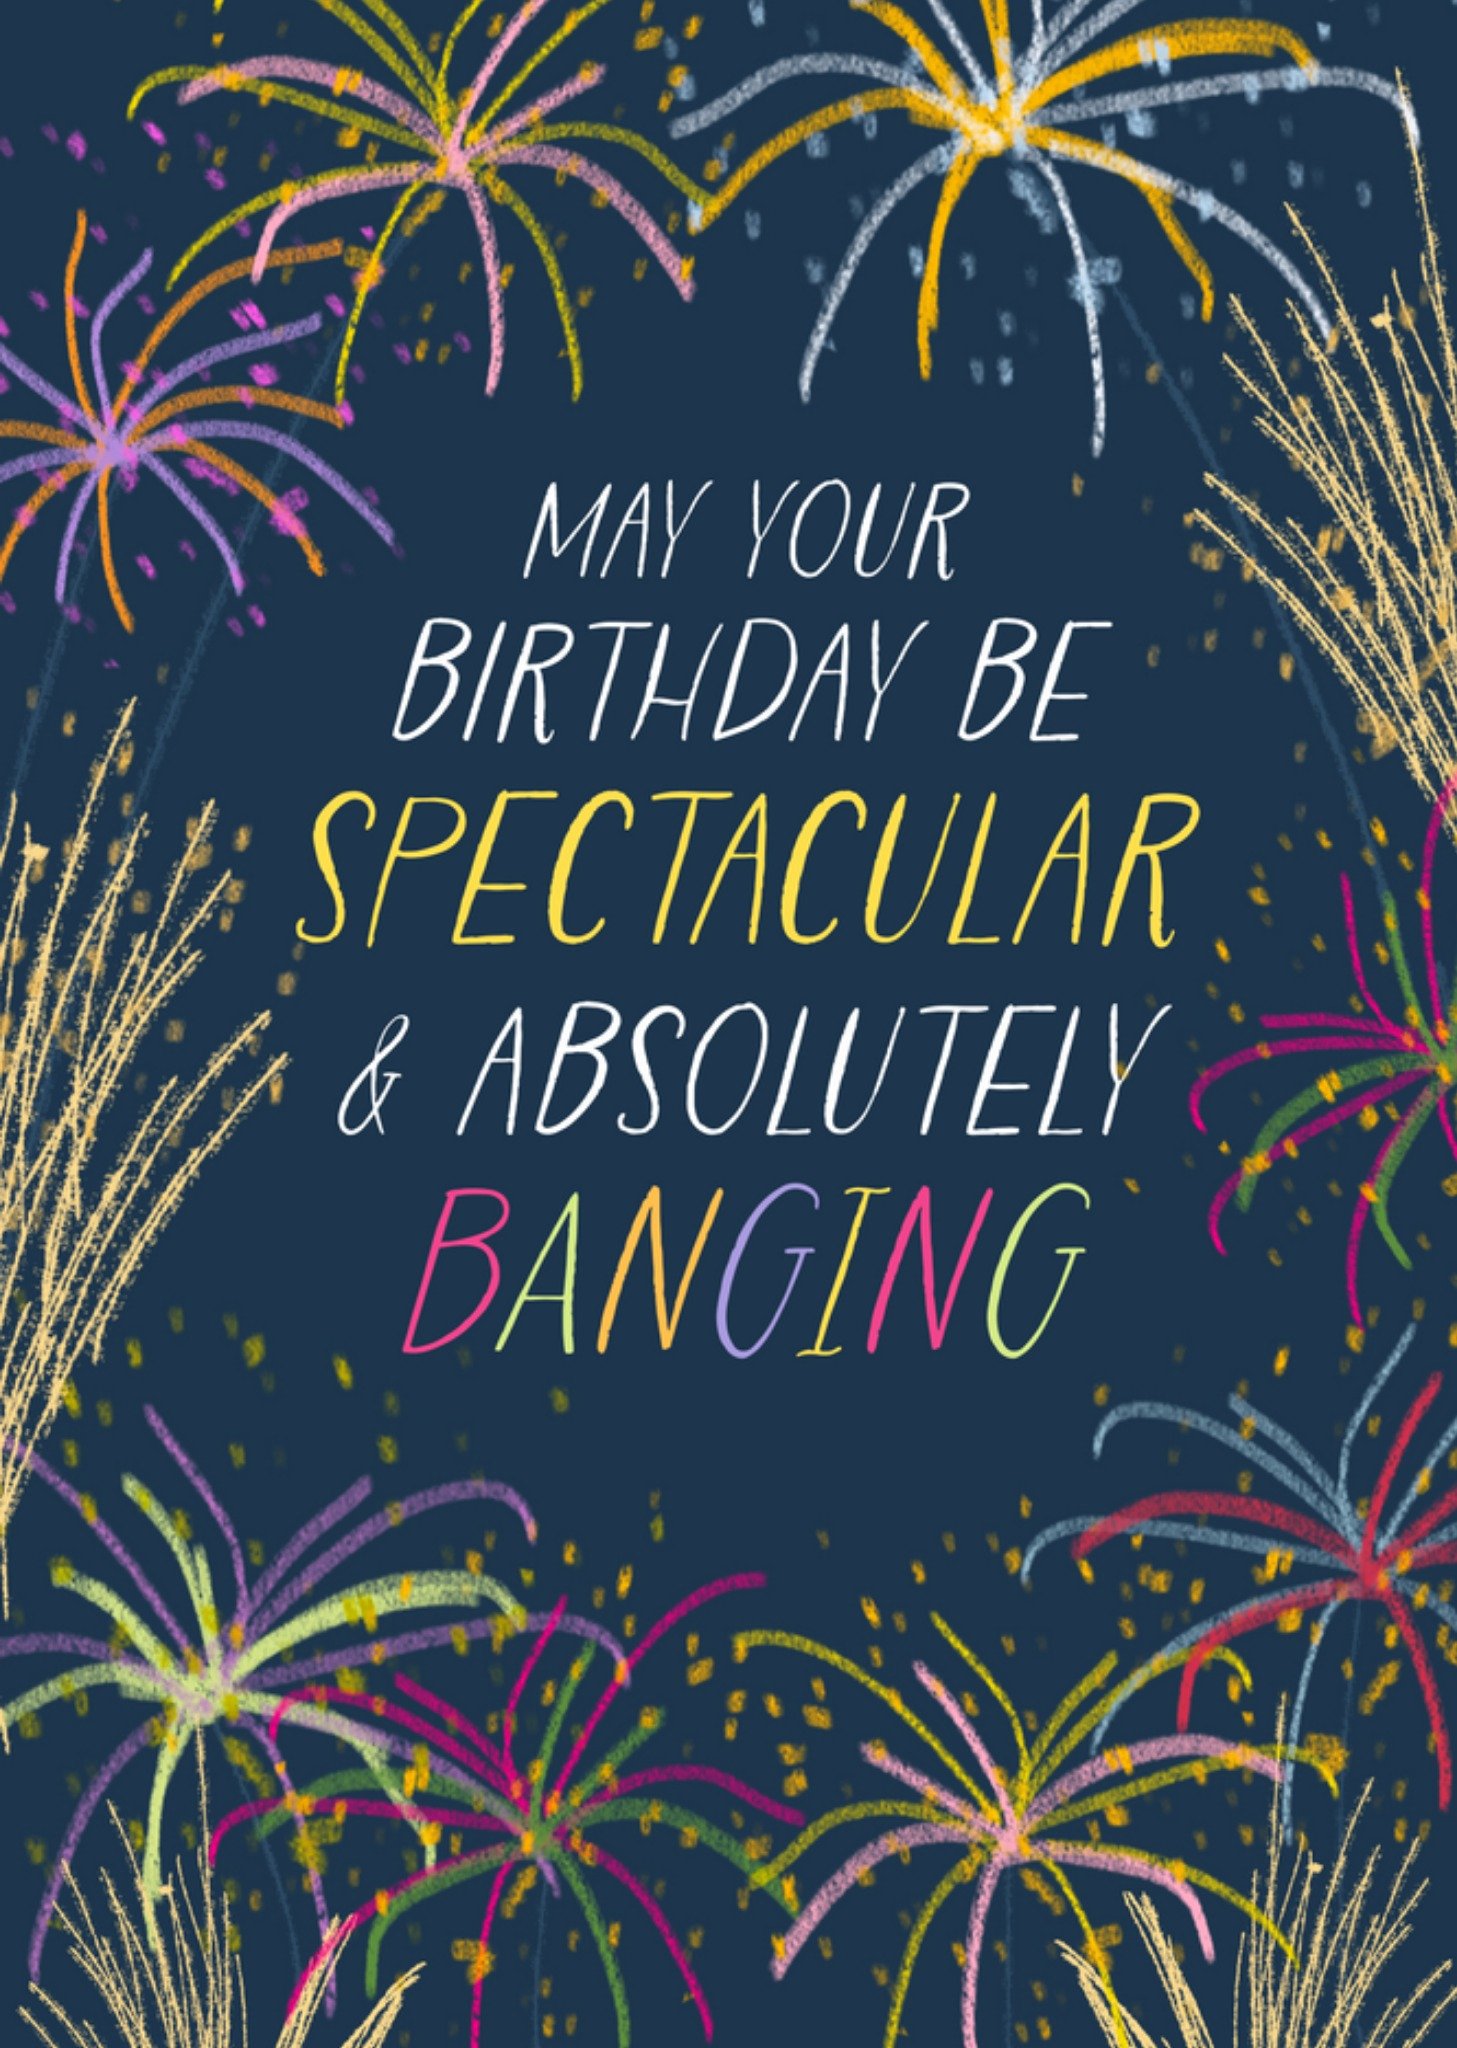 Moonpig Absolutely Banging Fireworks Spectacular Birthday Card, Large